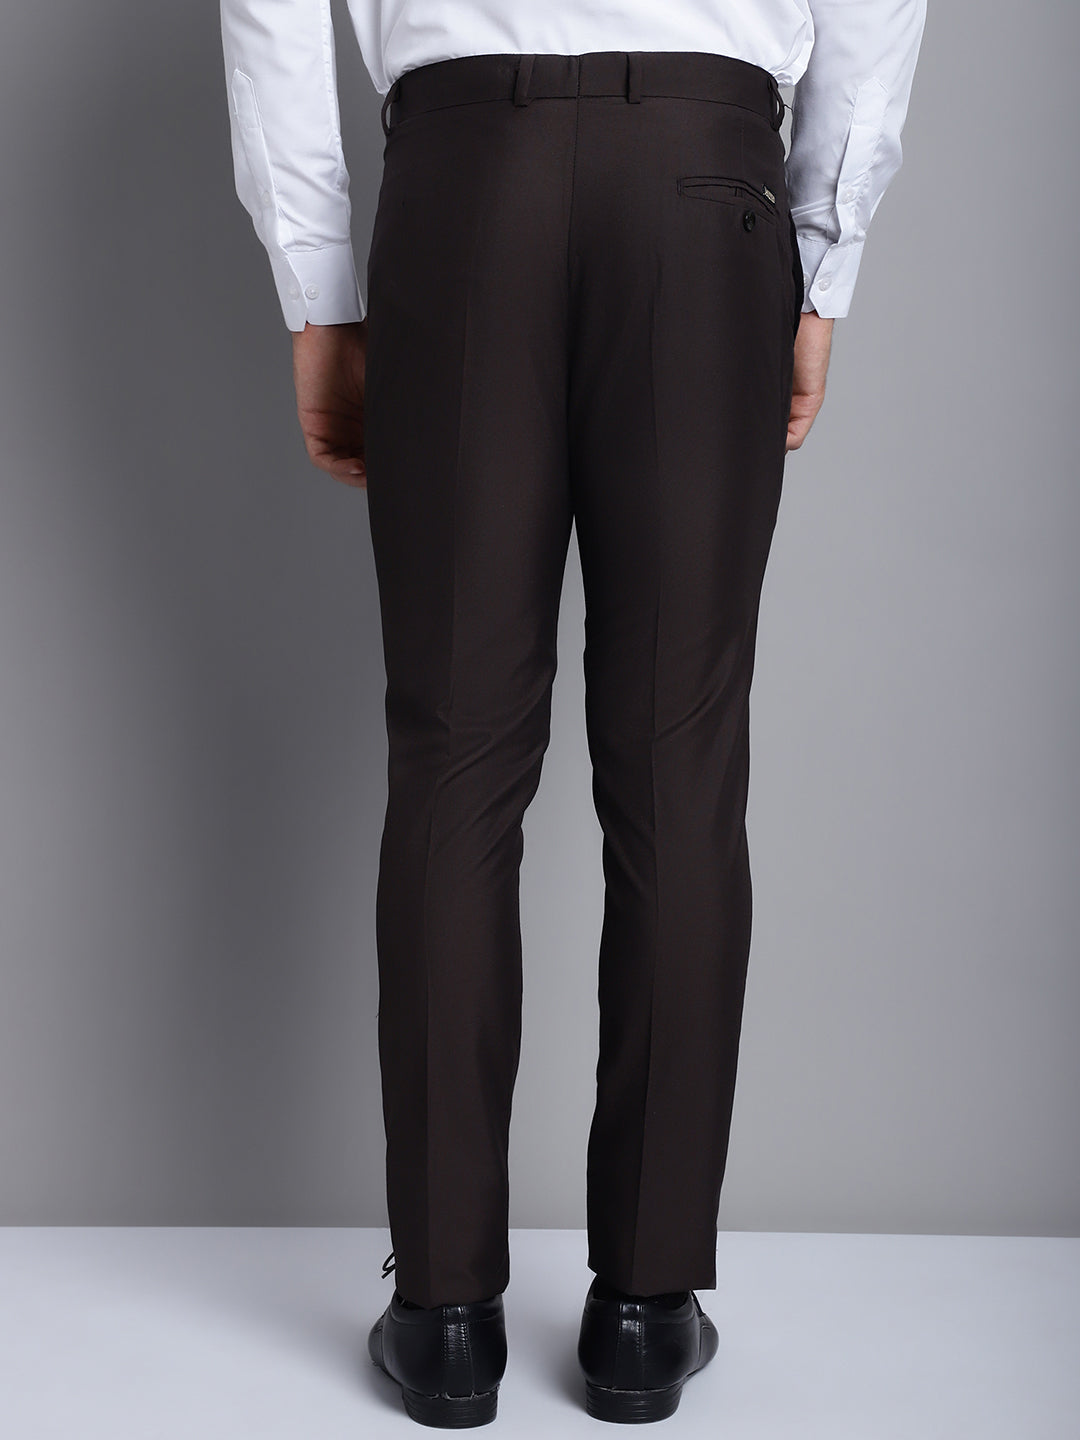 Jainish Men's Coffee Tapered Fit Formal Trousers